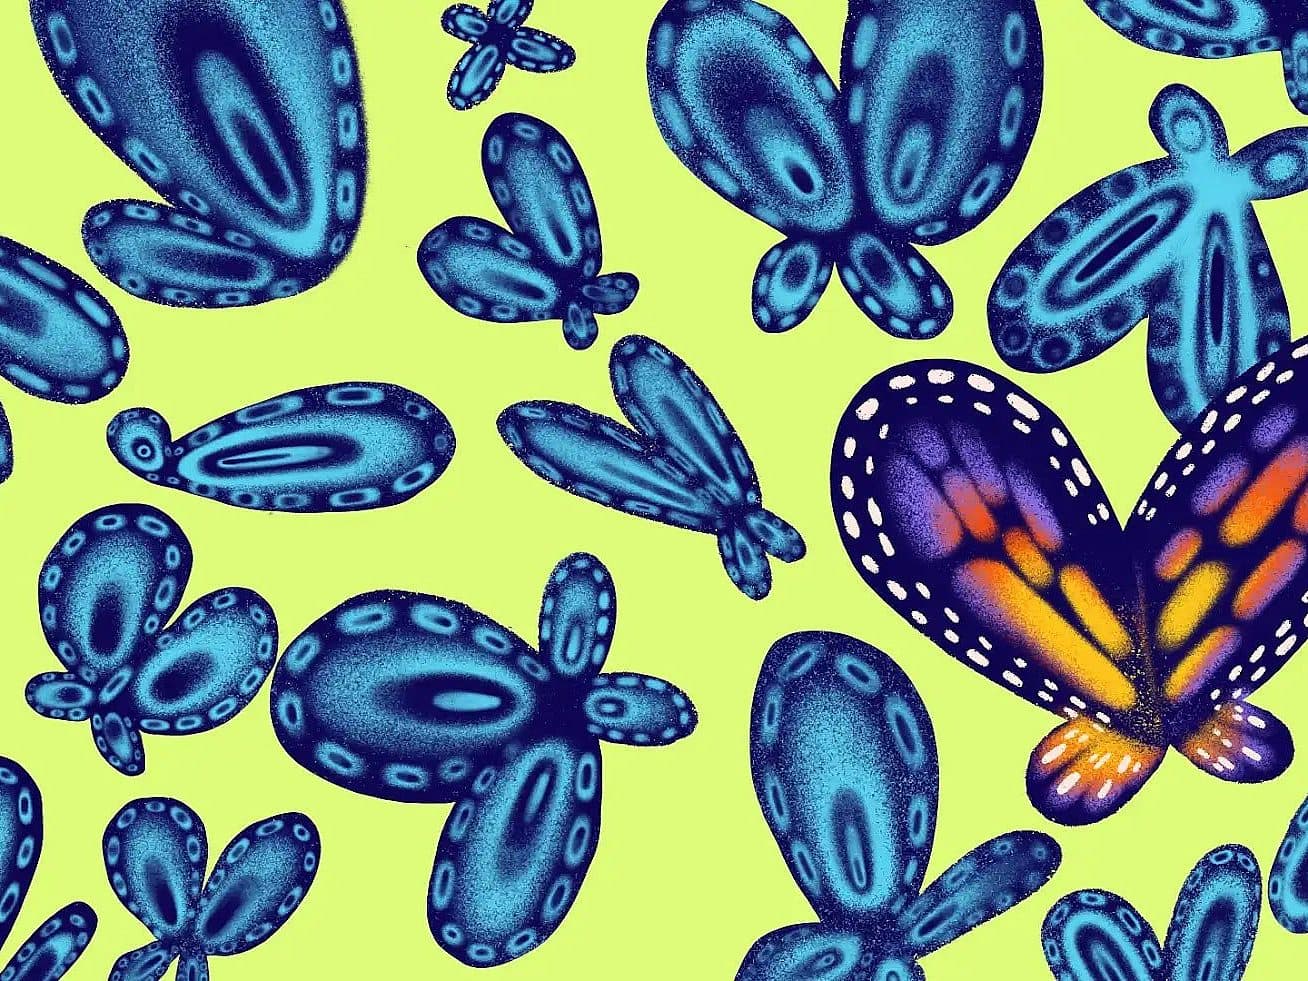 An illustration featuring a variety of abstract, blue, balloon-like butterflies with intricate patterns. One standout butterfly is heart-shaped with a vibrant gradient of blue, purple, and yellow. The background is a light green shade.